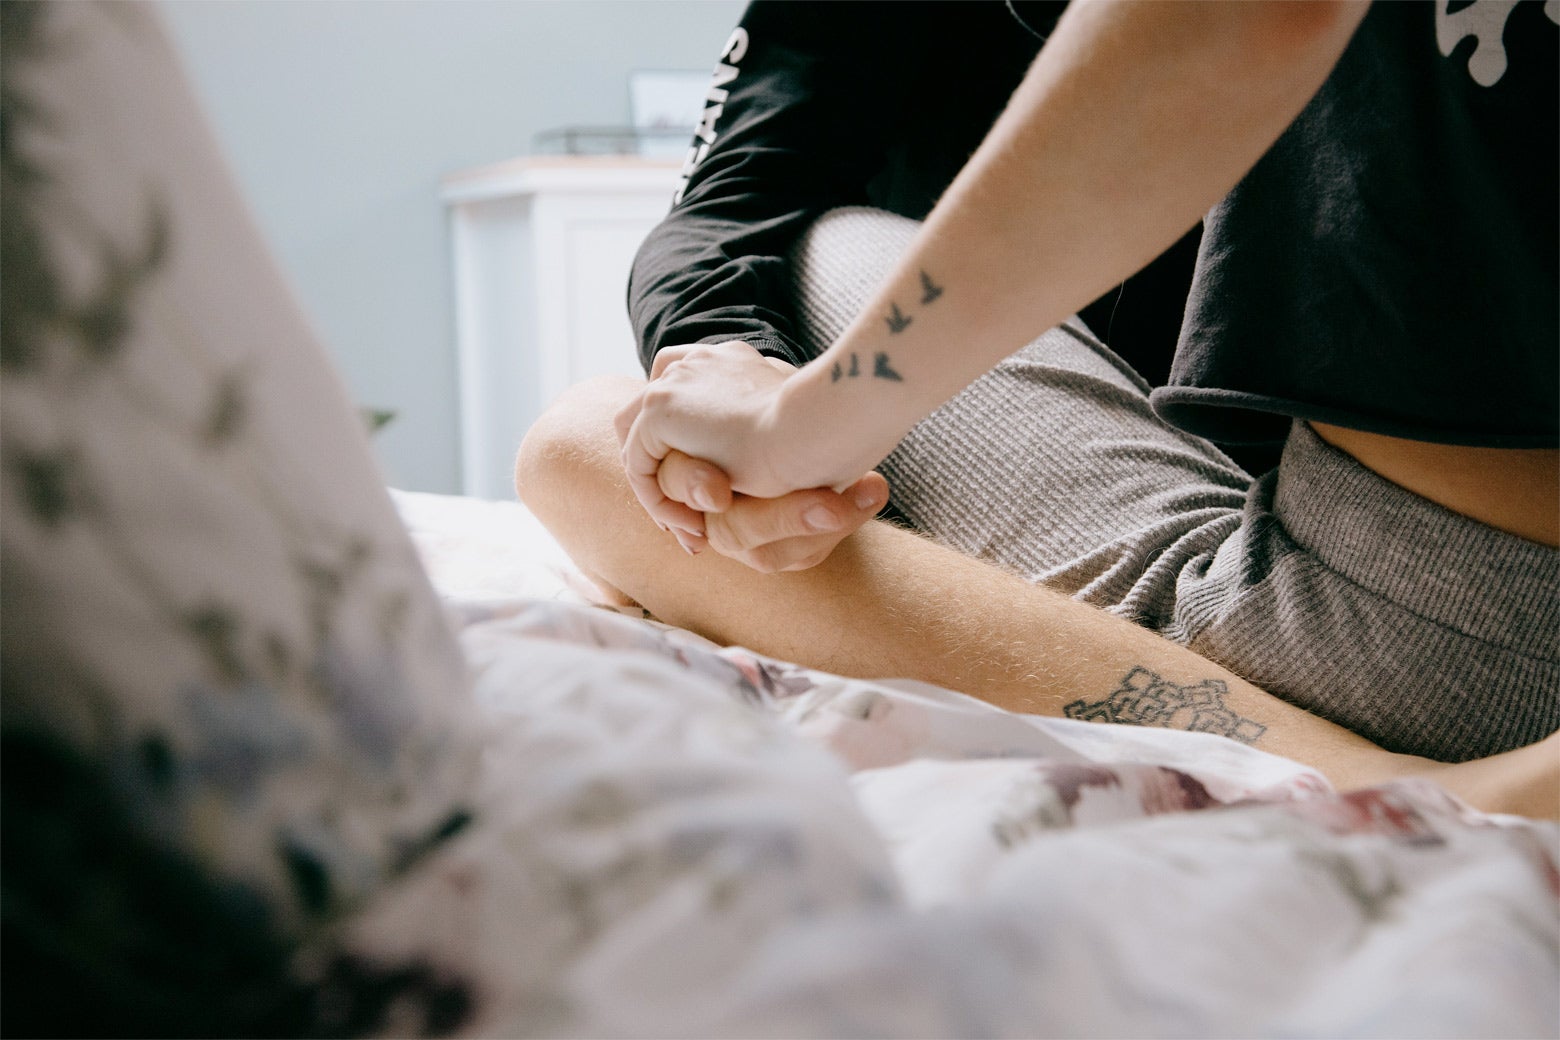 Two tattooed teens hold hands.